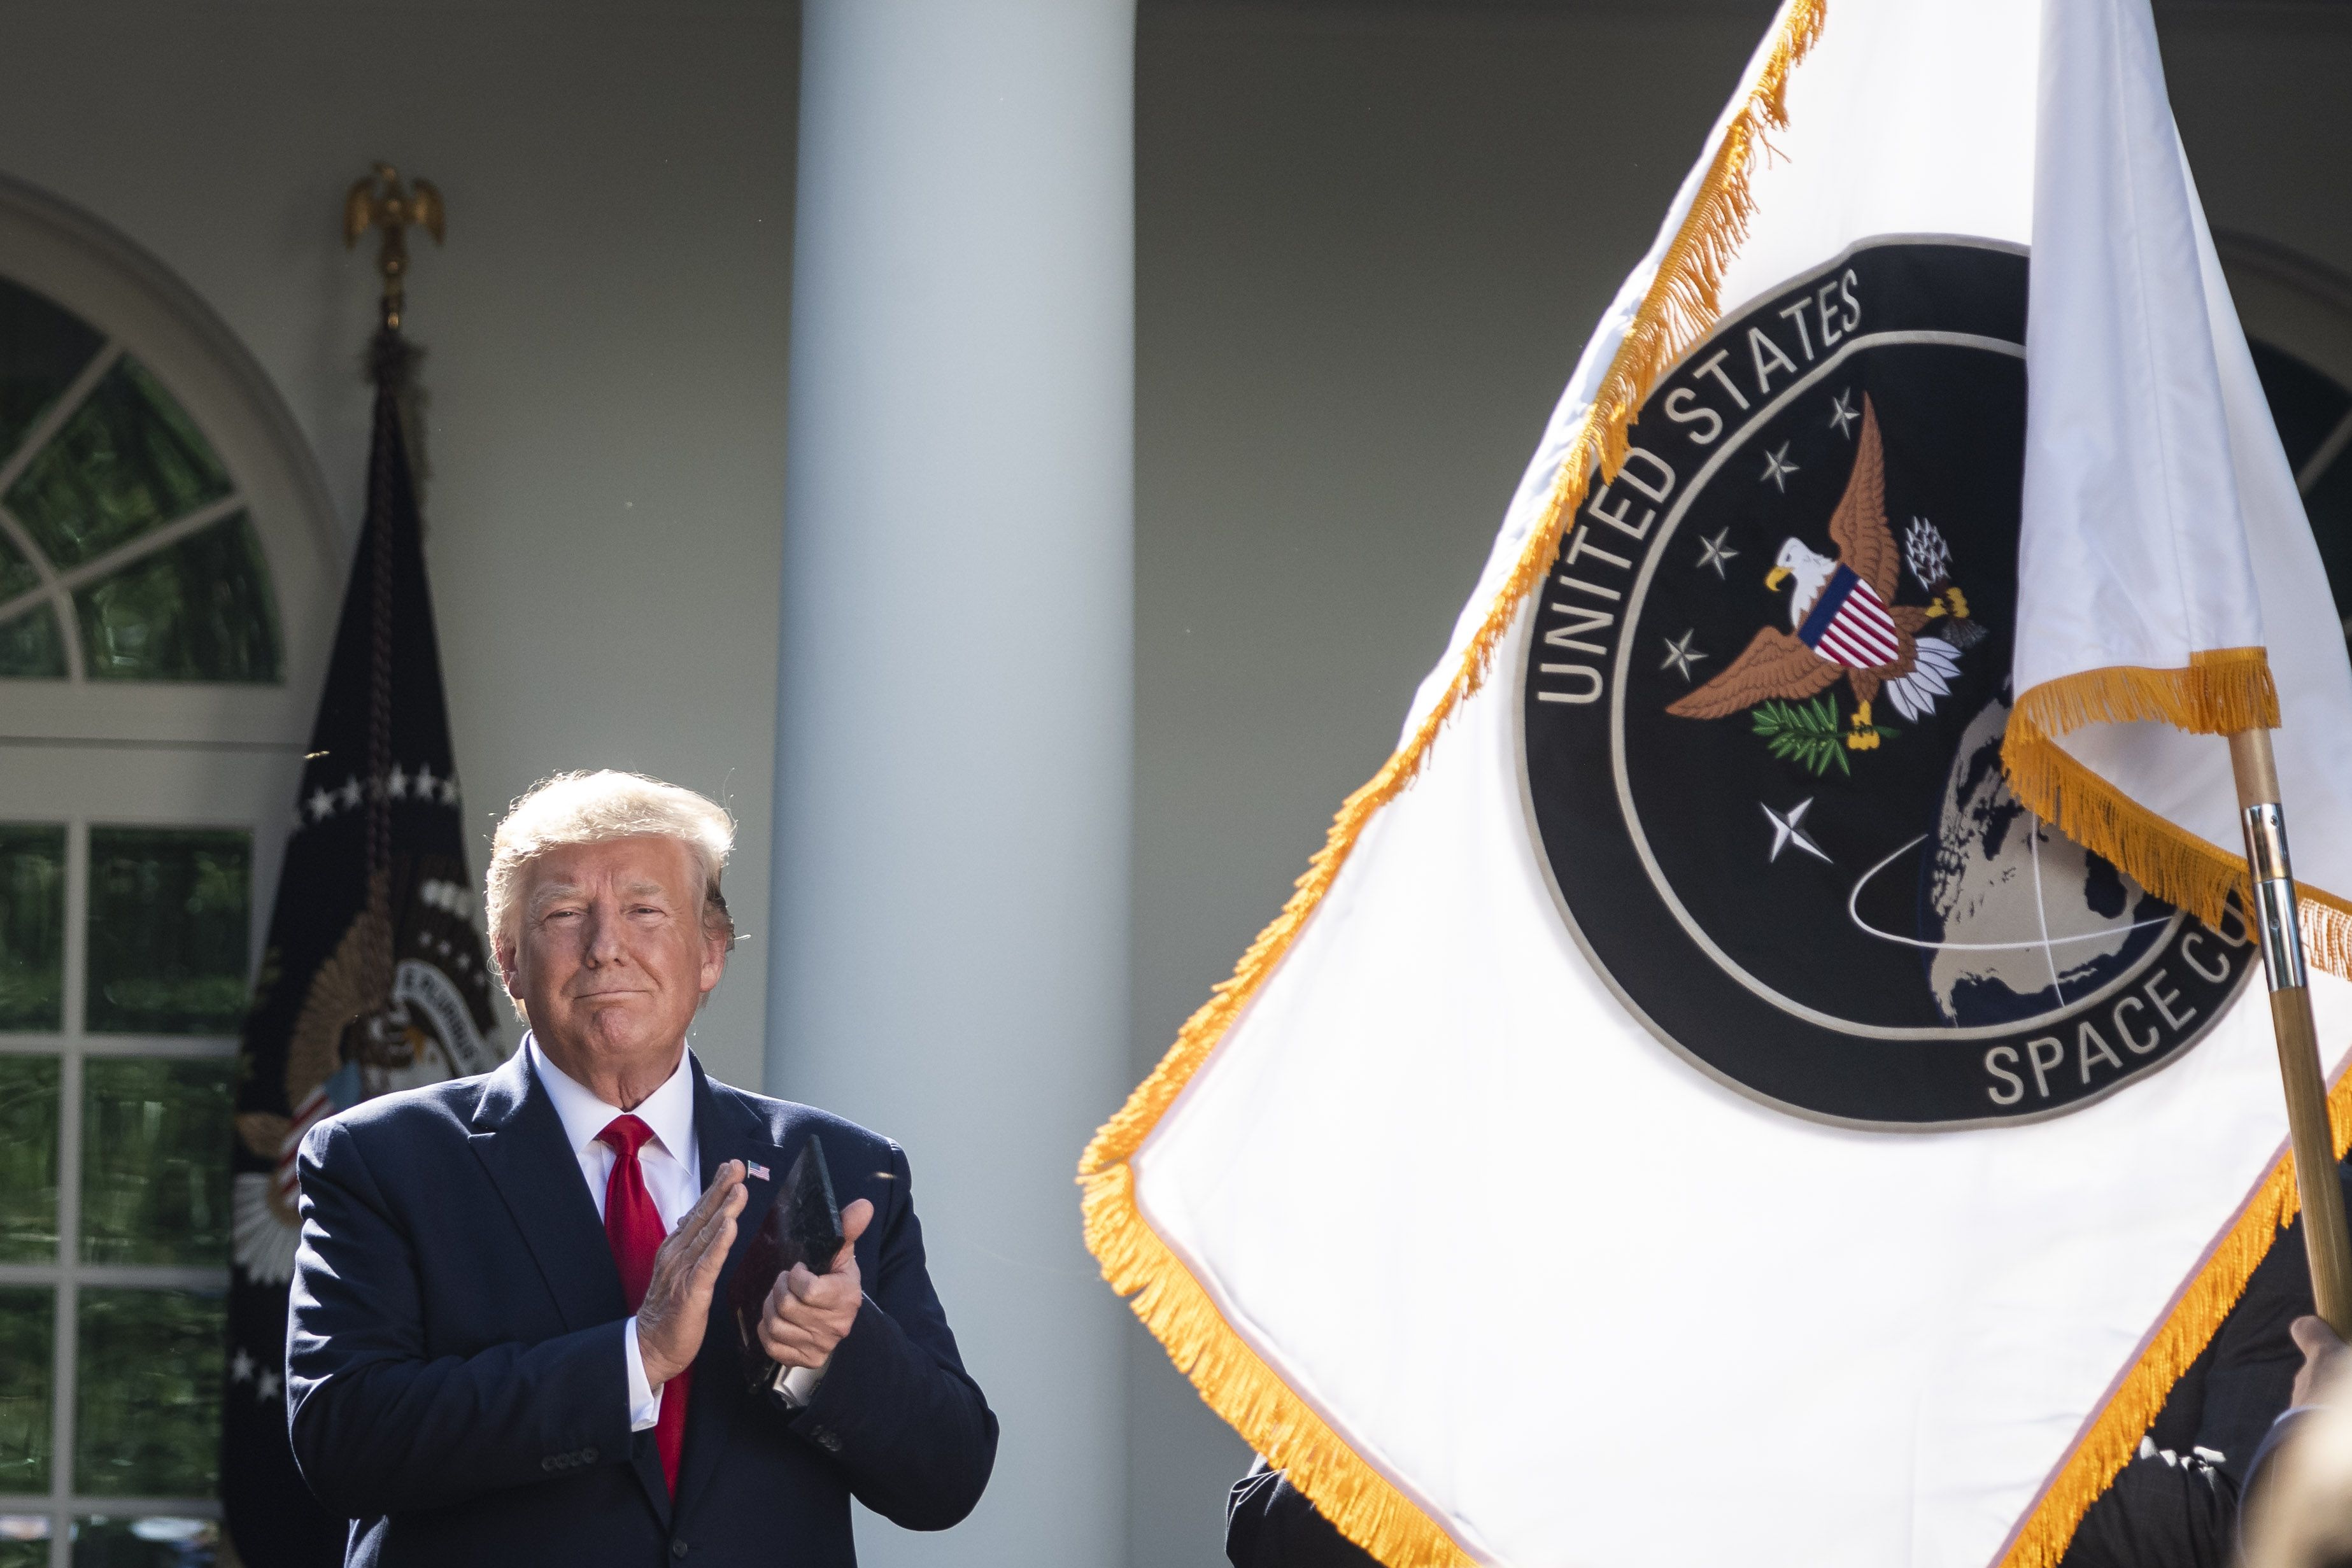 president-donald-j-trump-looks-as-a-flag-is-revealed-during-news-photo-1568822015.jpg